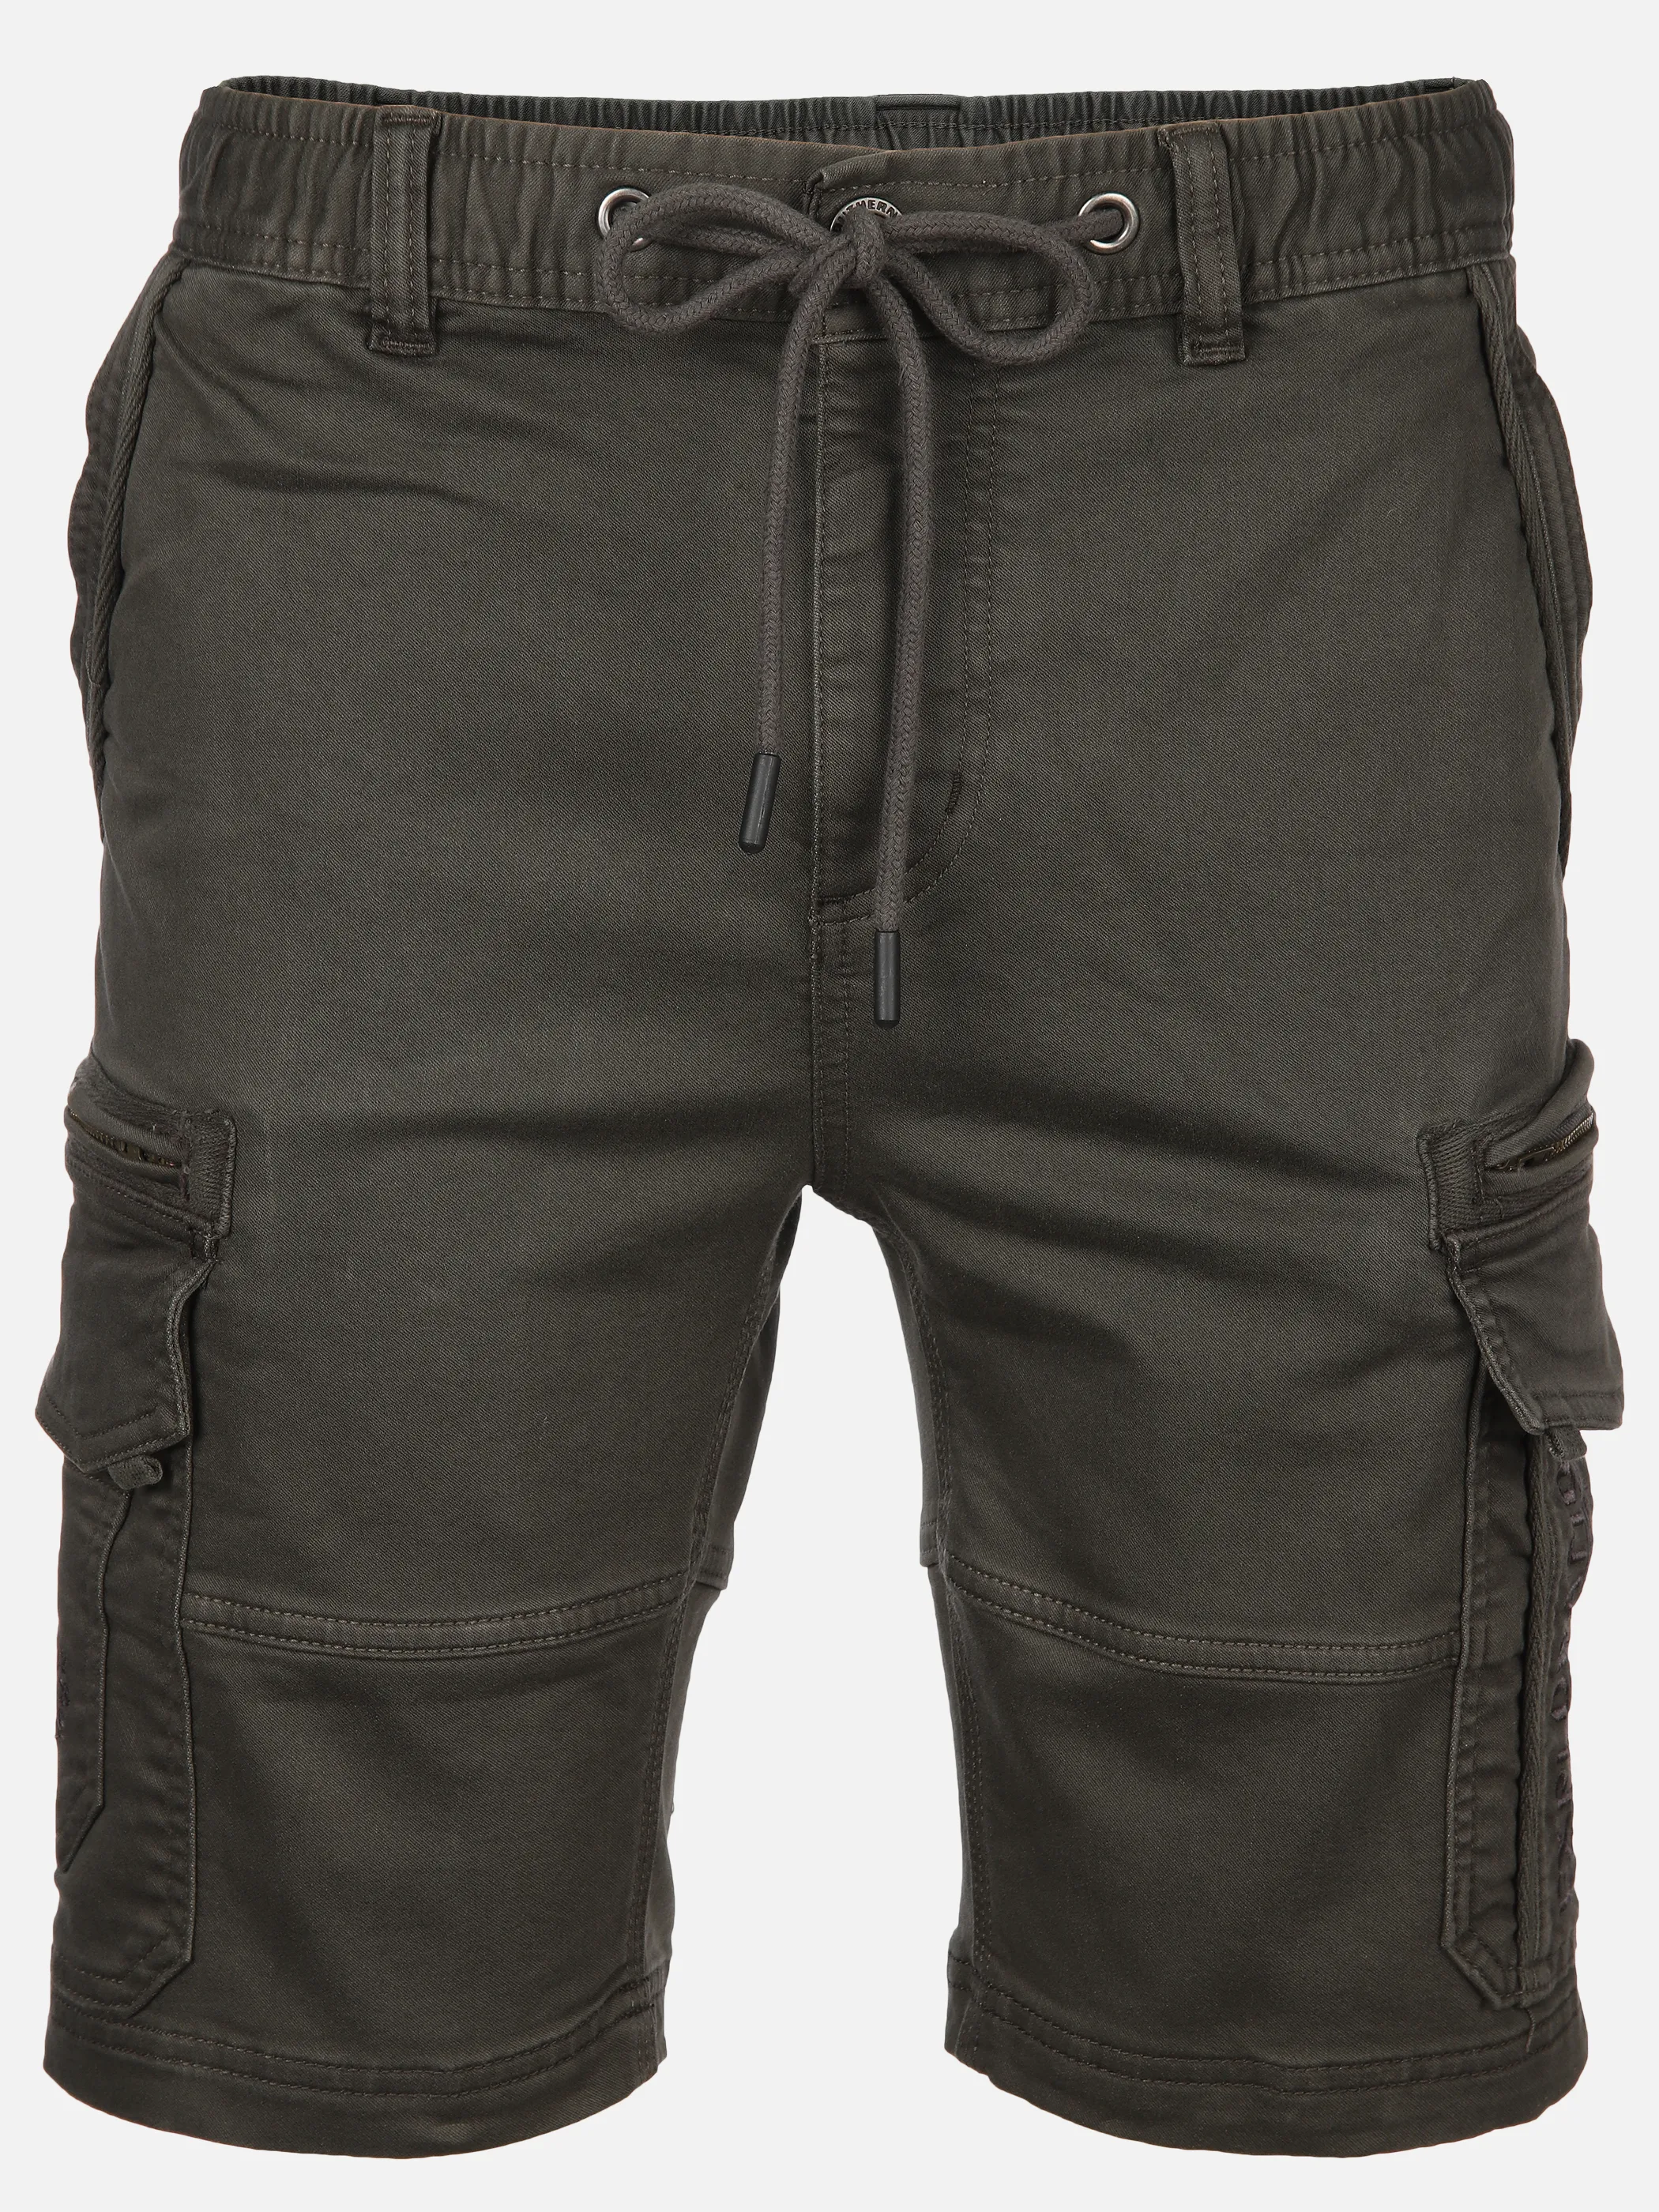 Southern Territory He. Cargoshort Stretch Oliv 892287 OLIVE 1